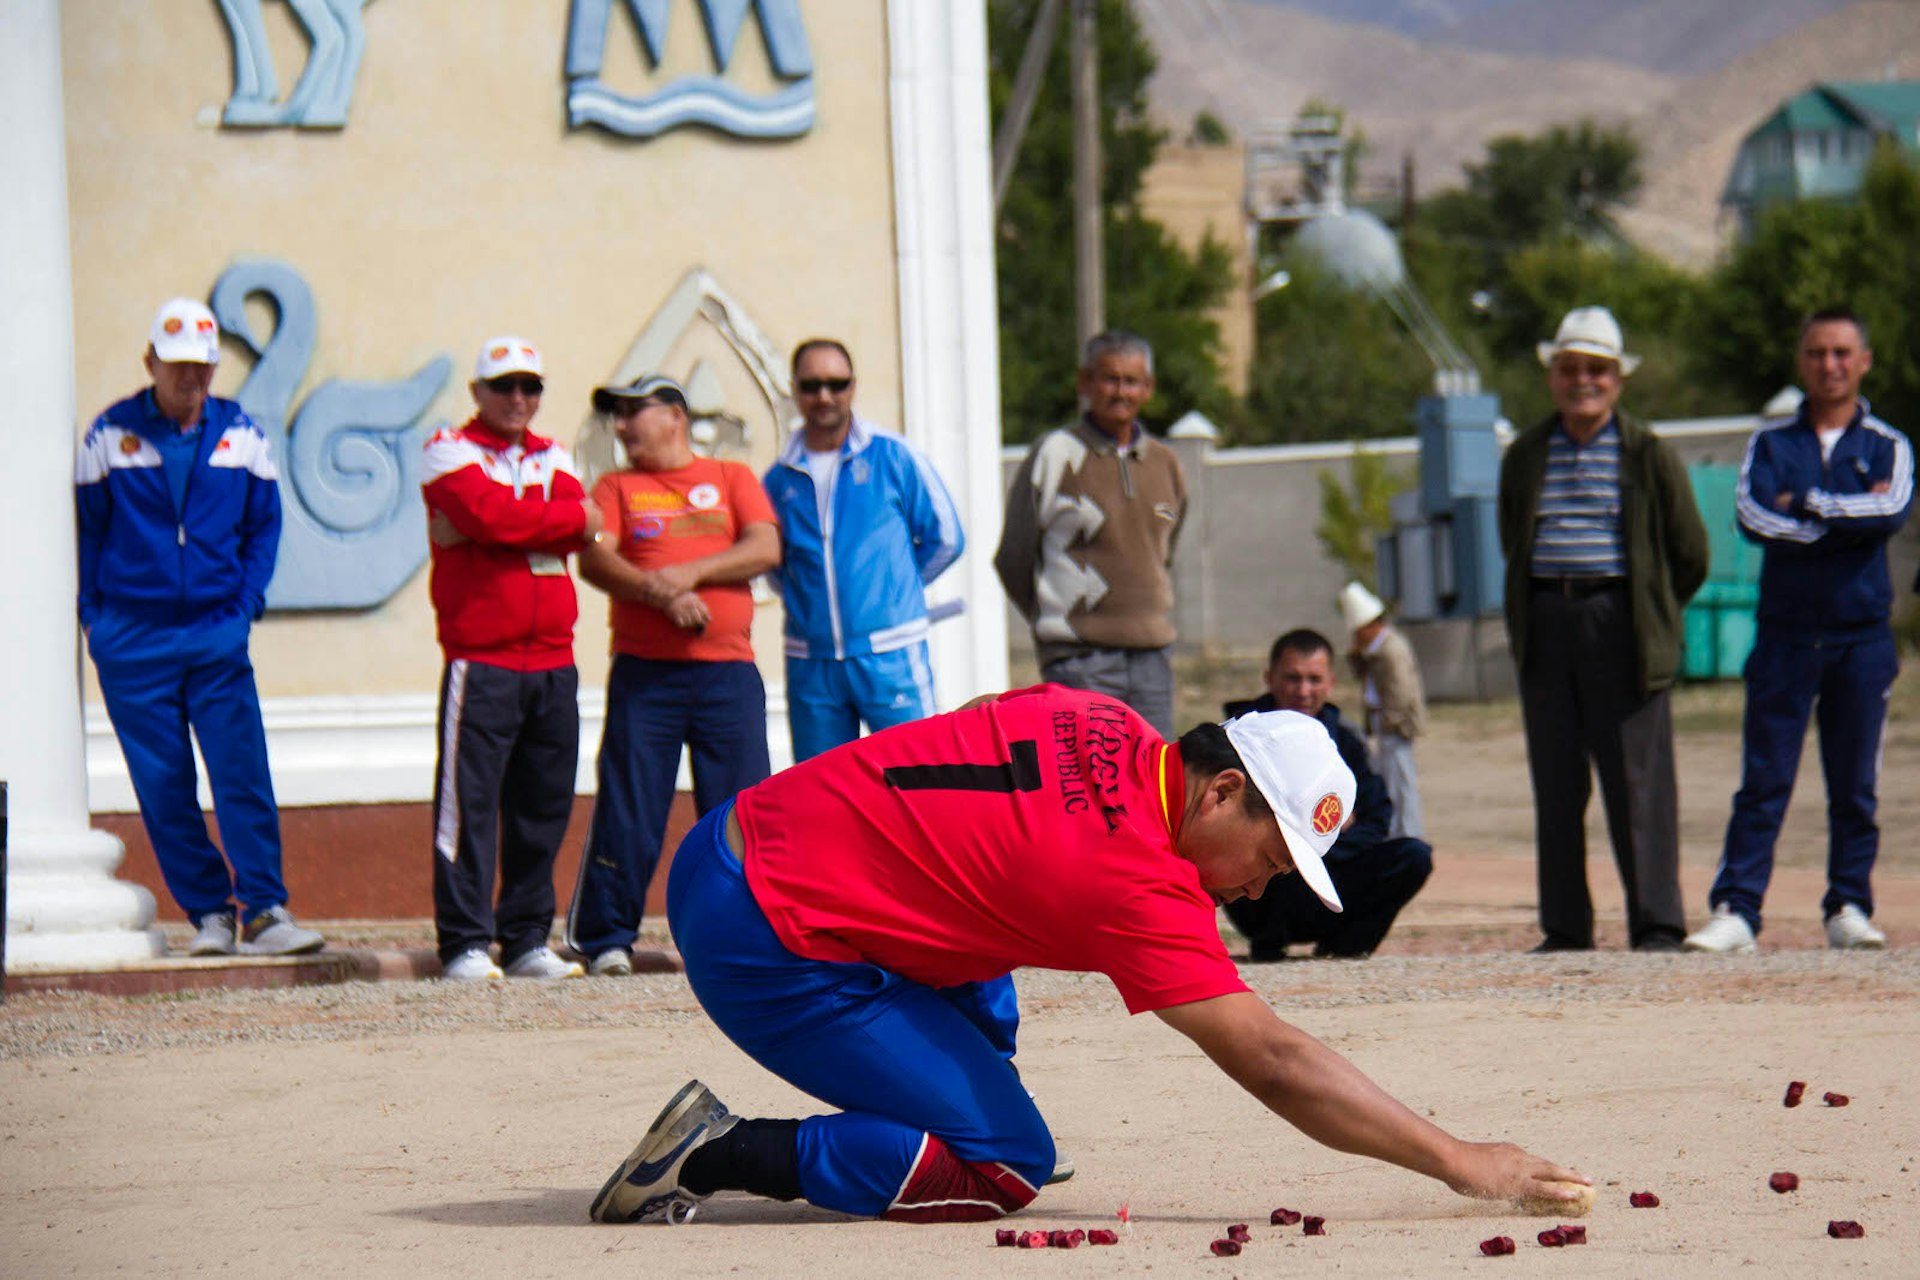 An ordo player takes aim as spectators look on during the 2014 World Nomad Games in Kyrgyzstan © Stephen Lioy / Lonely Planet